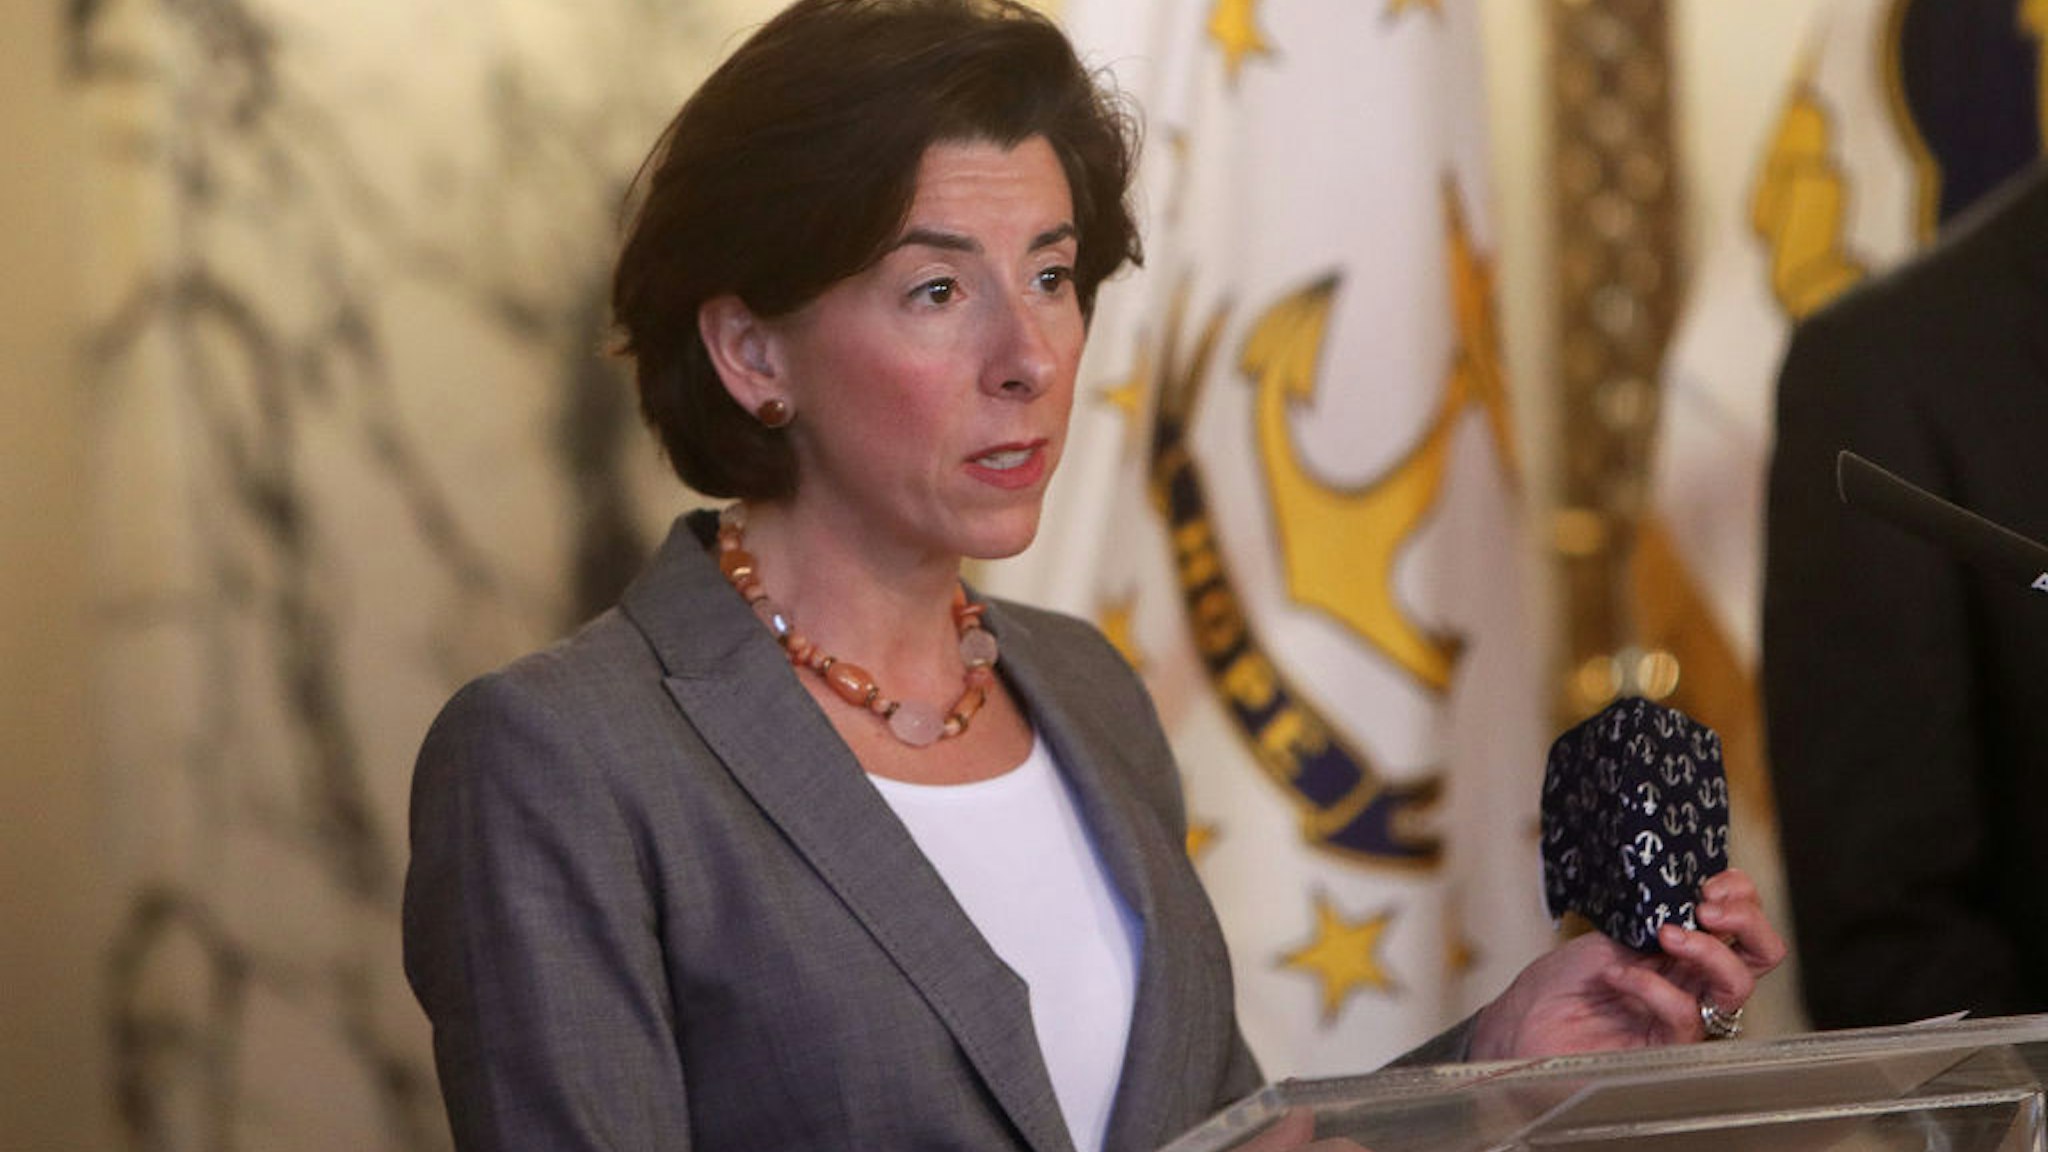 Rhode Island Governor Gina Raimondo, holding her mask in her left hand, speaks during a press conference in Providence, RI on April 14, 2020.